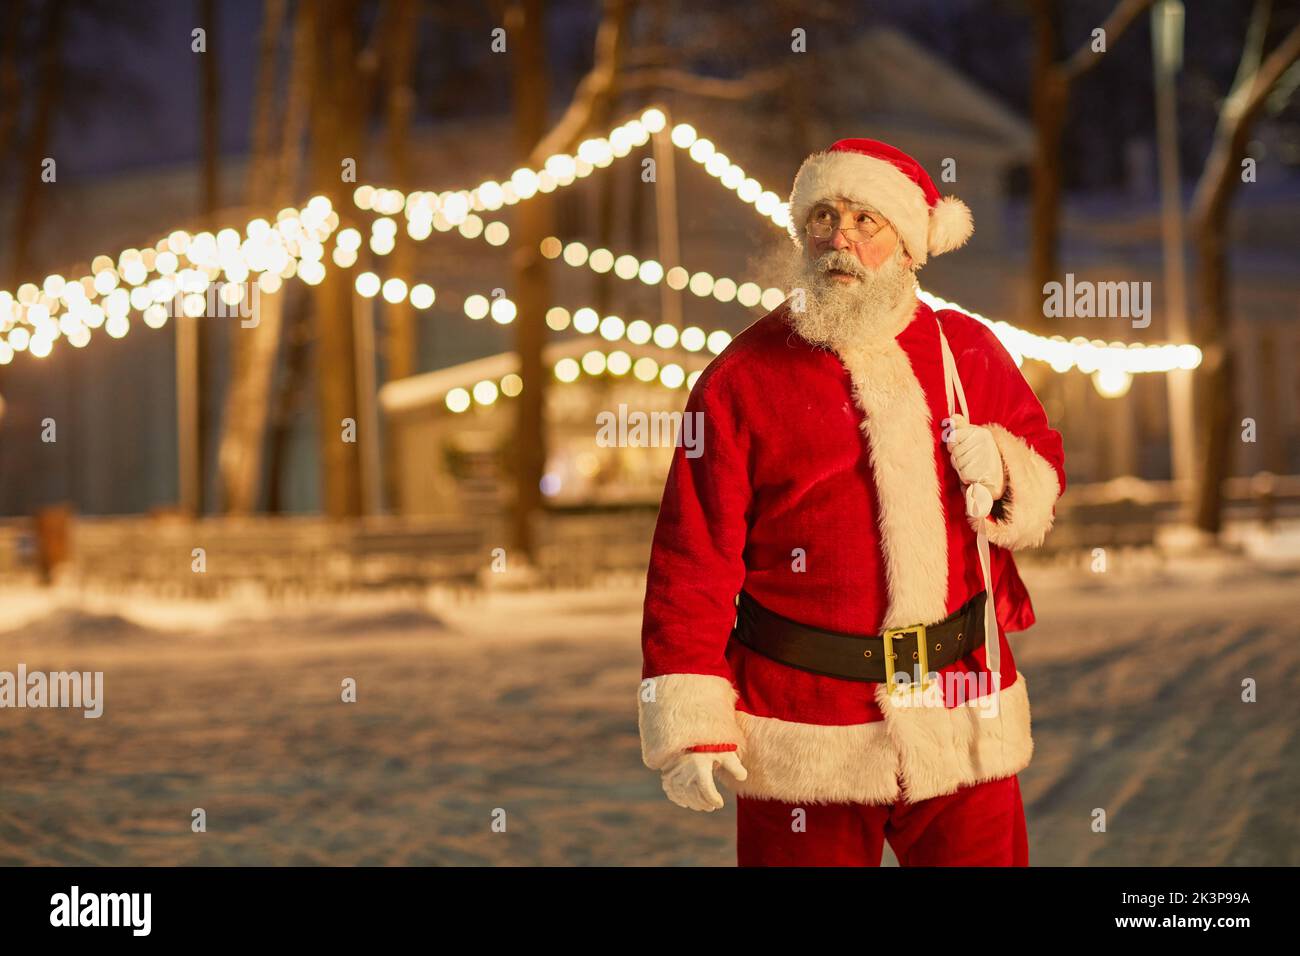 Waist up portrait of traditional Santa Claus carrying bag with presents at night with fairy lights in background, copy space Stock Photo